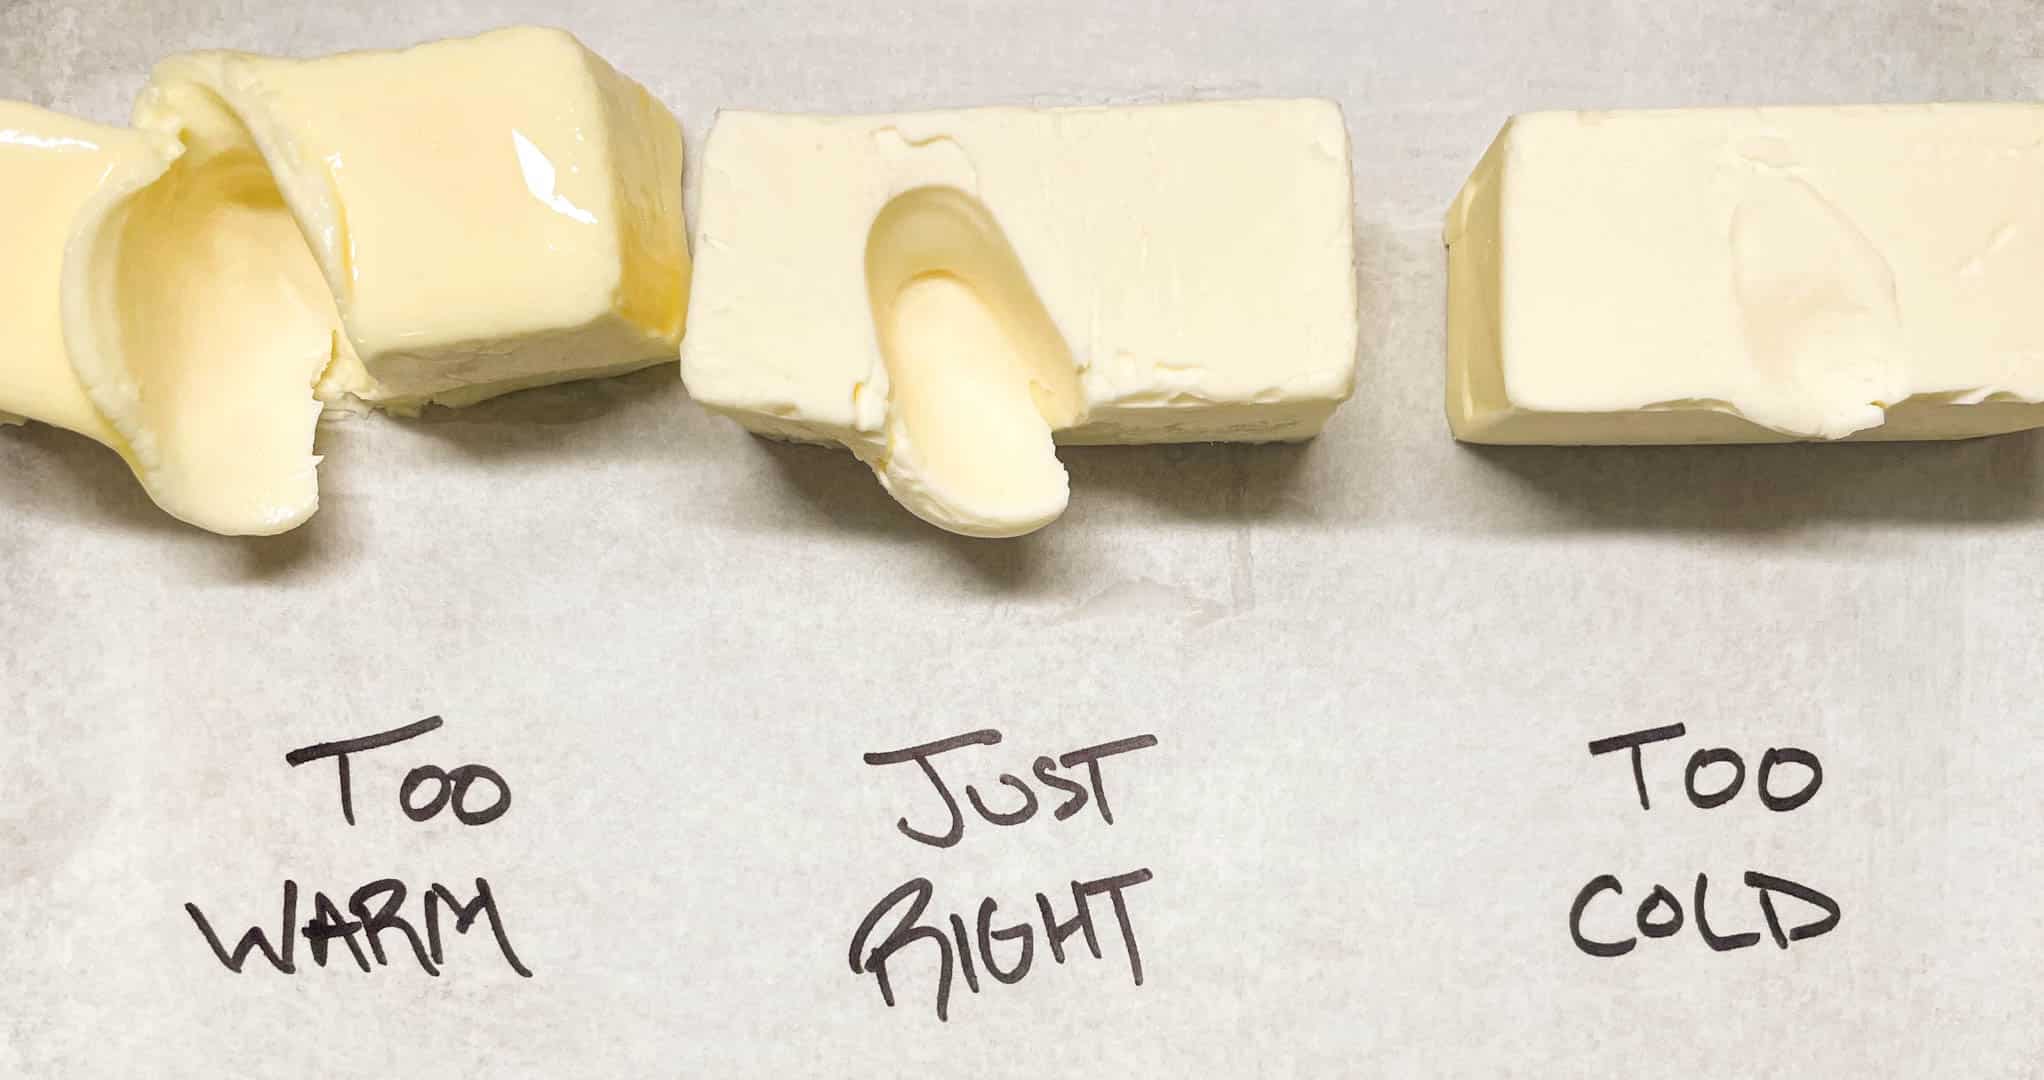 Three sticks of butter showing different softness.